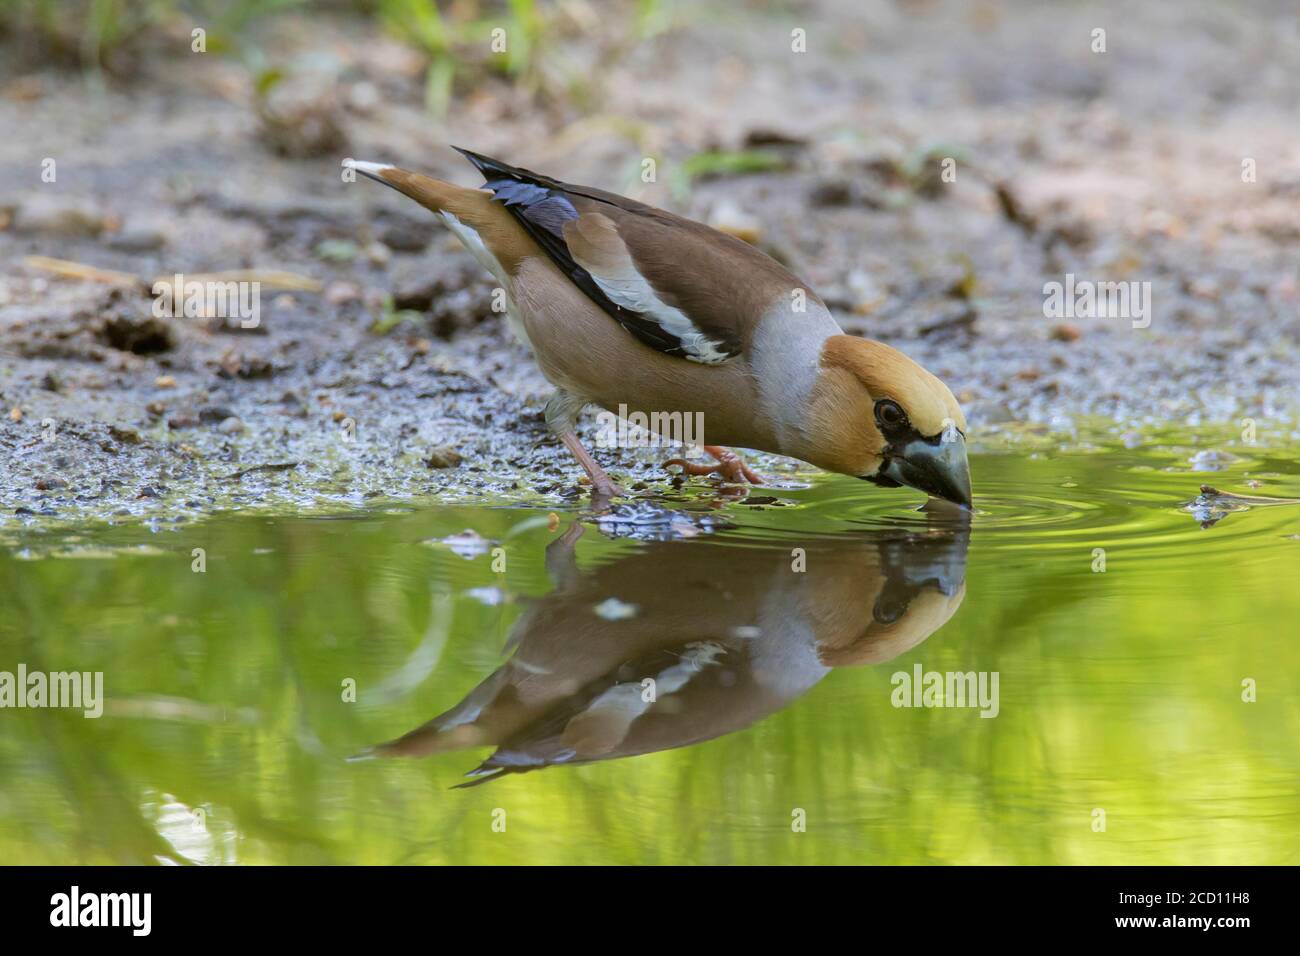 Hawfinch (Coccothraustes coccothraustes) male drinking water from puddle / pool / pond Stock Photo